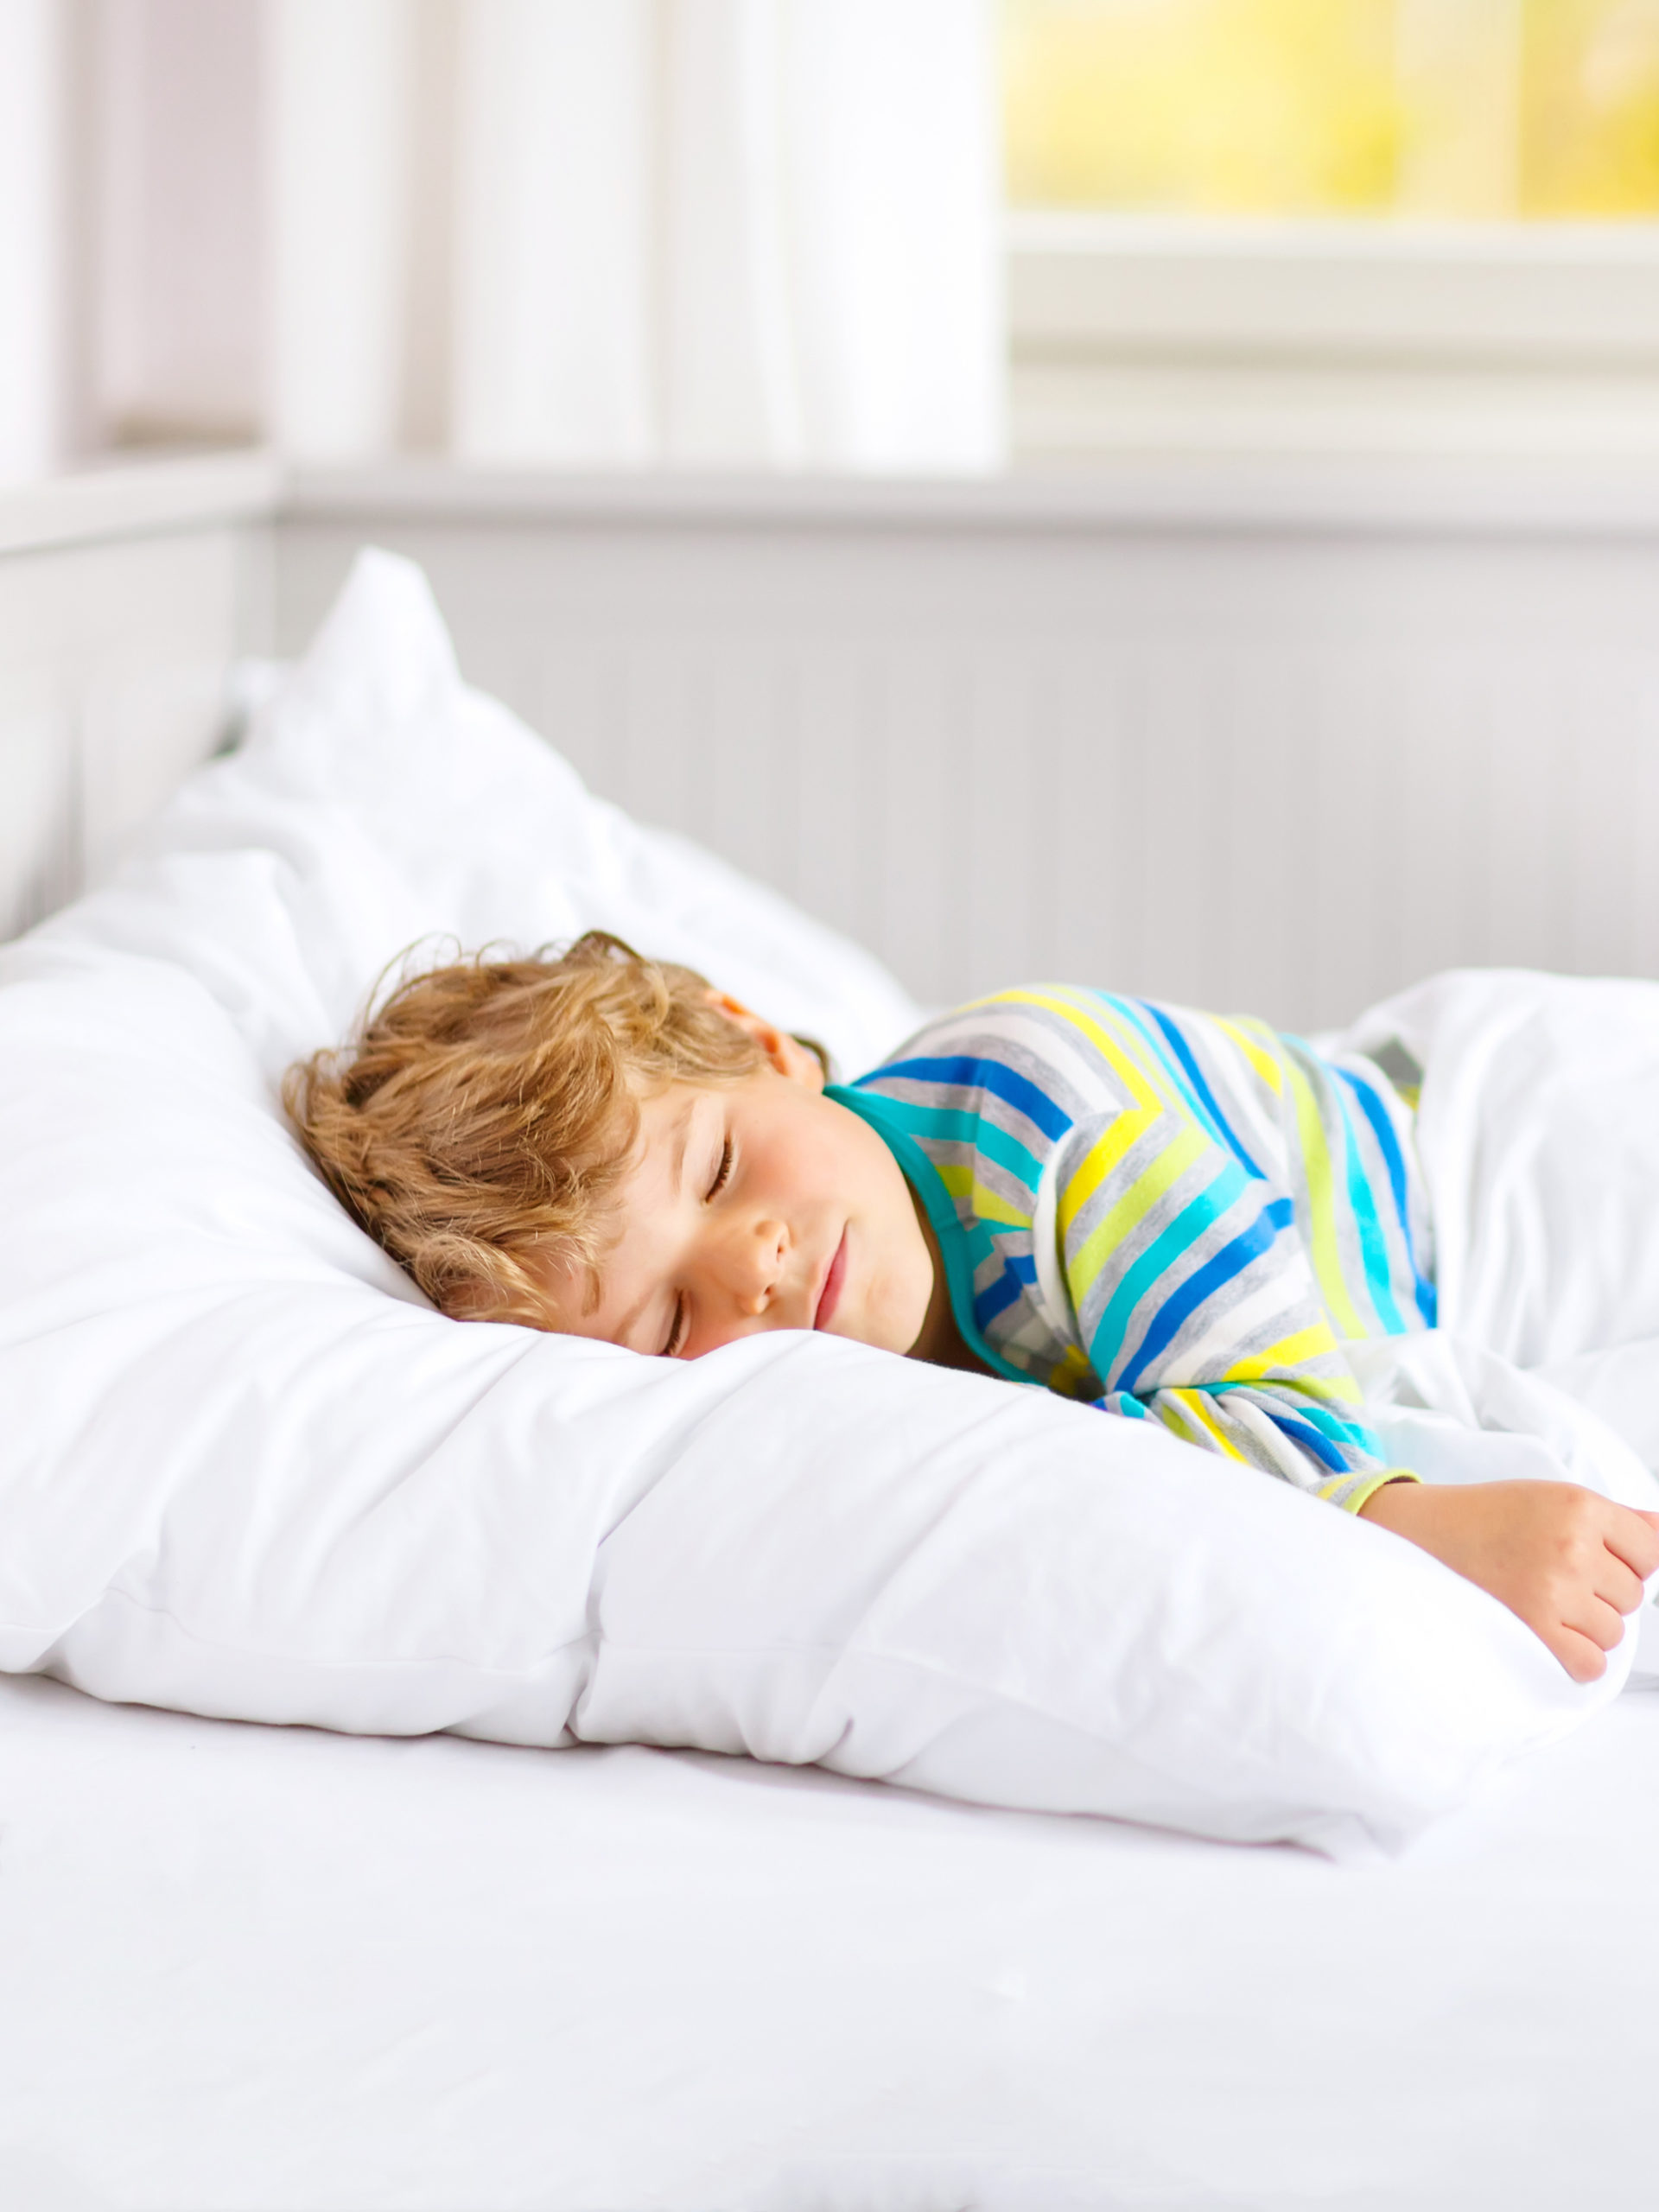 young boy sleeping in bed smiling